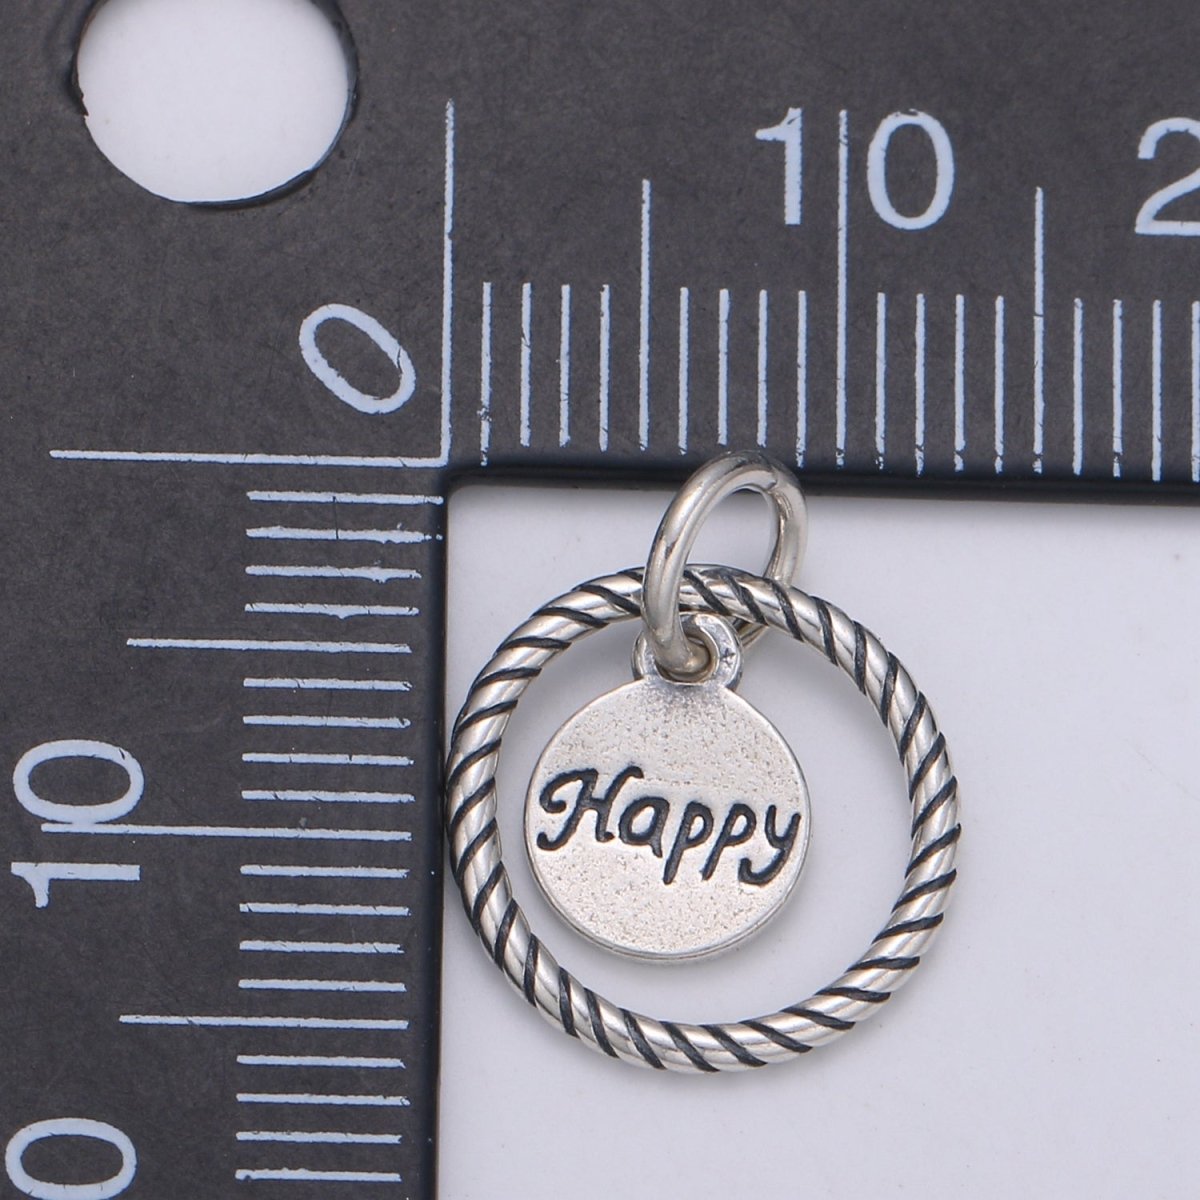 925 Sterling Silver Happy Loop Charm, Message Charm Silver Happy Charm for Necklace Bracelet Earring, Happy Charm SL-132 - DLUXCA